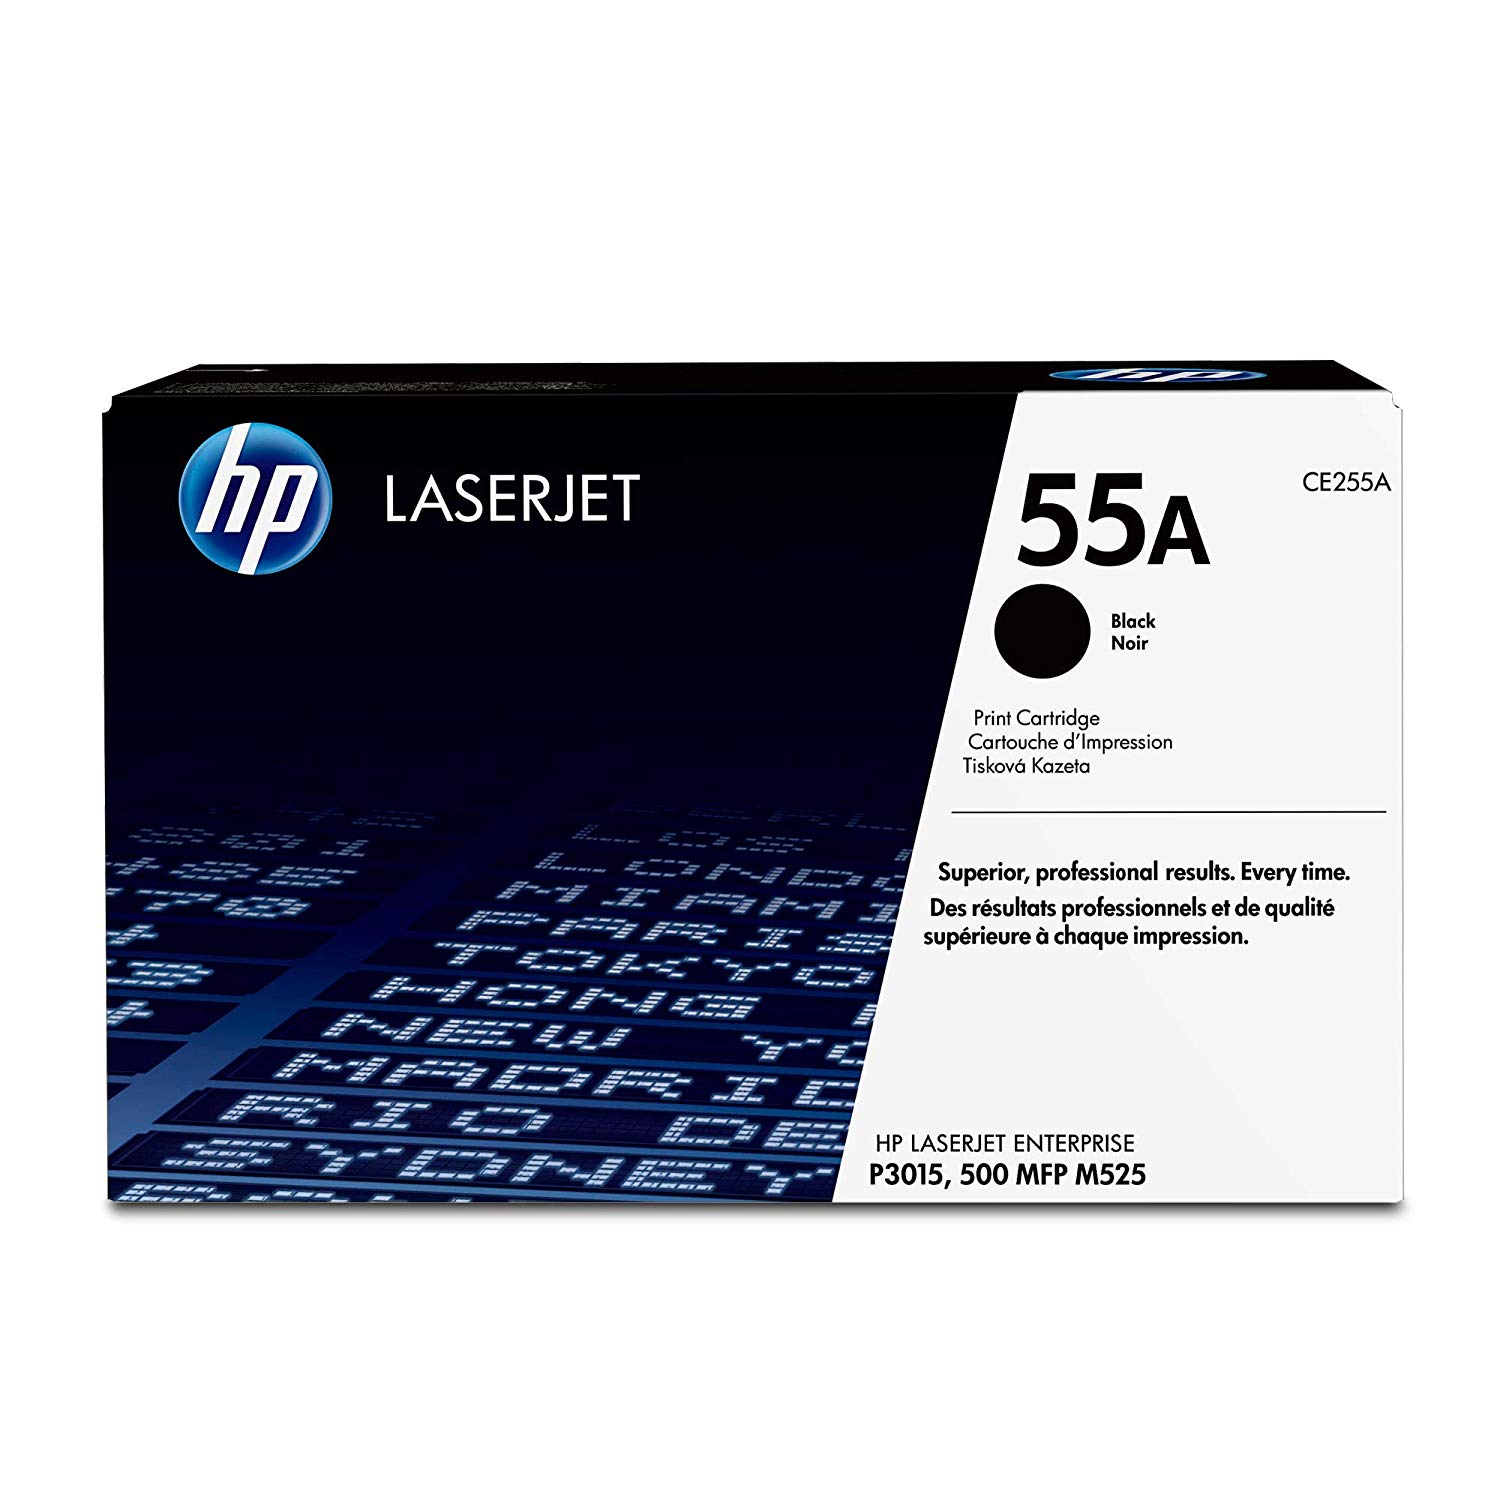 HP CE255A Black Toner, 6000pages - for HP LaserJet P3010 Series, P3015 Series